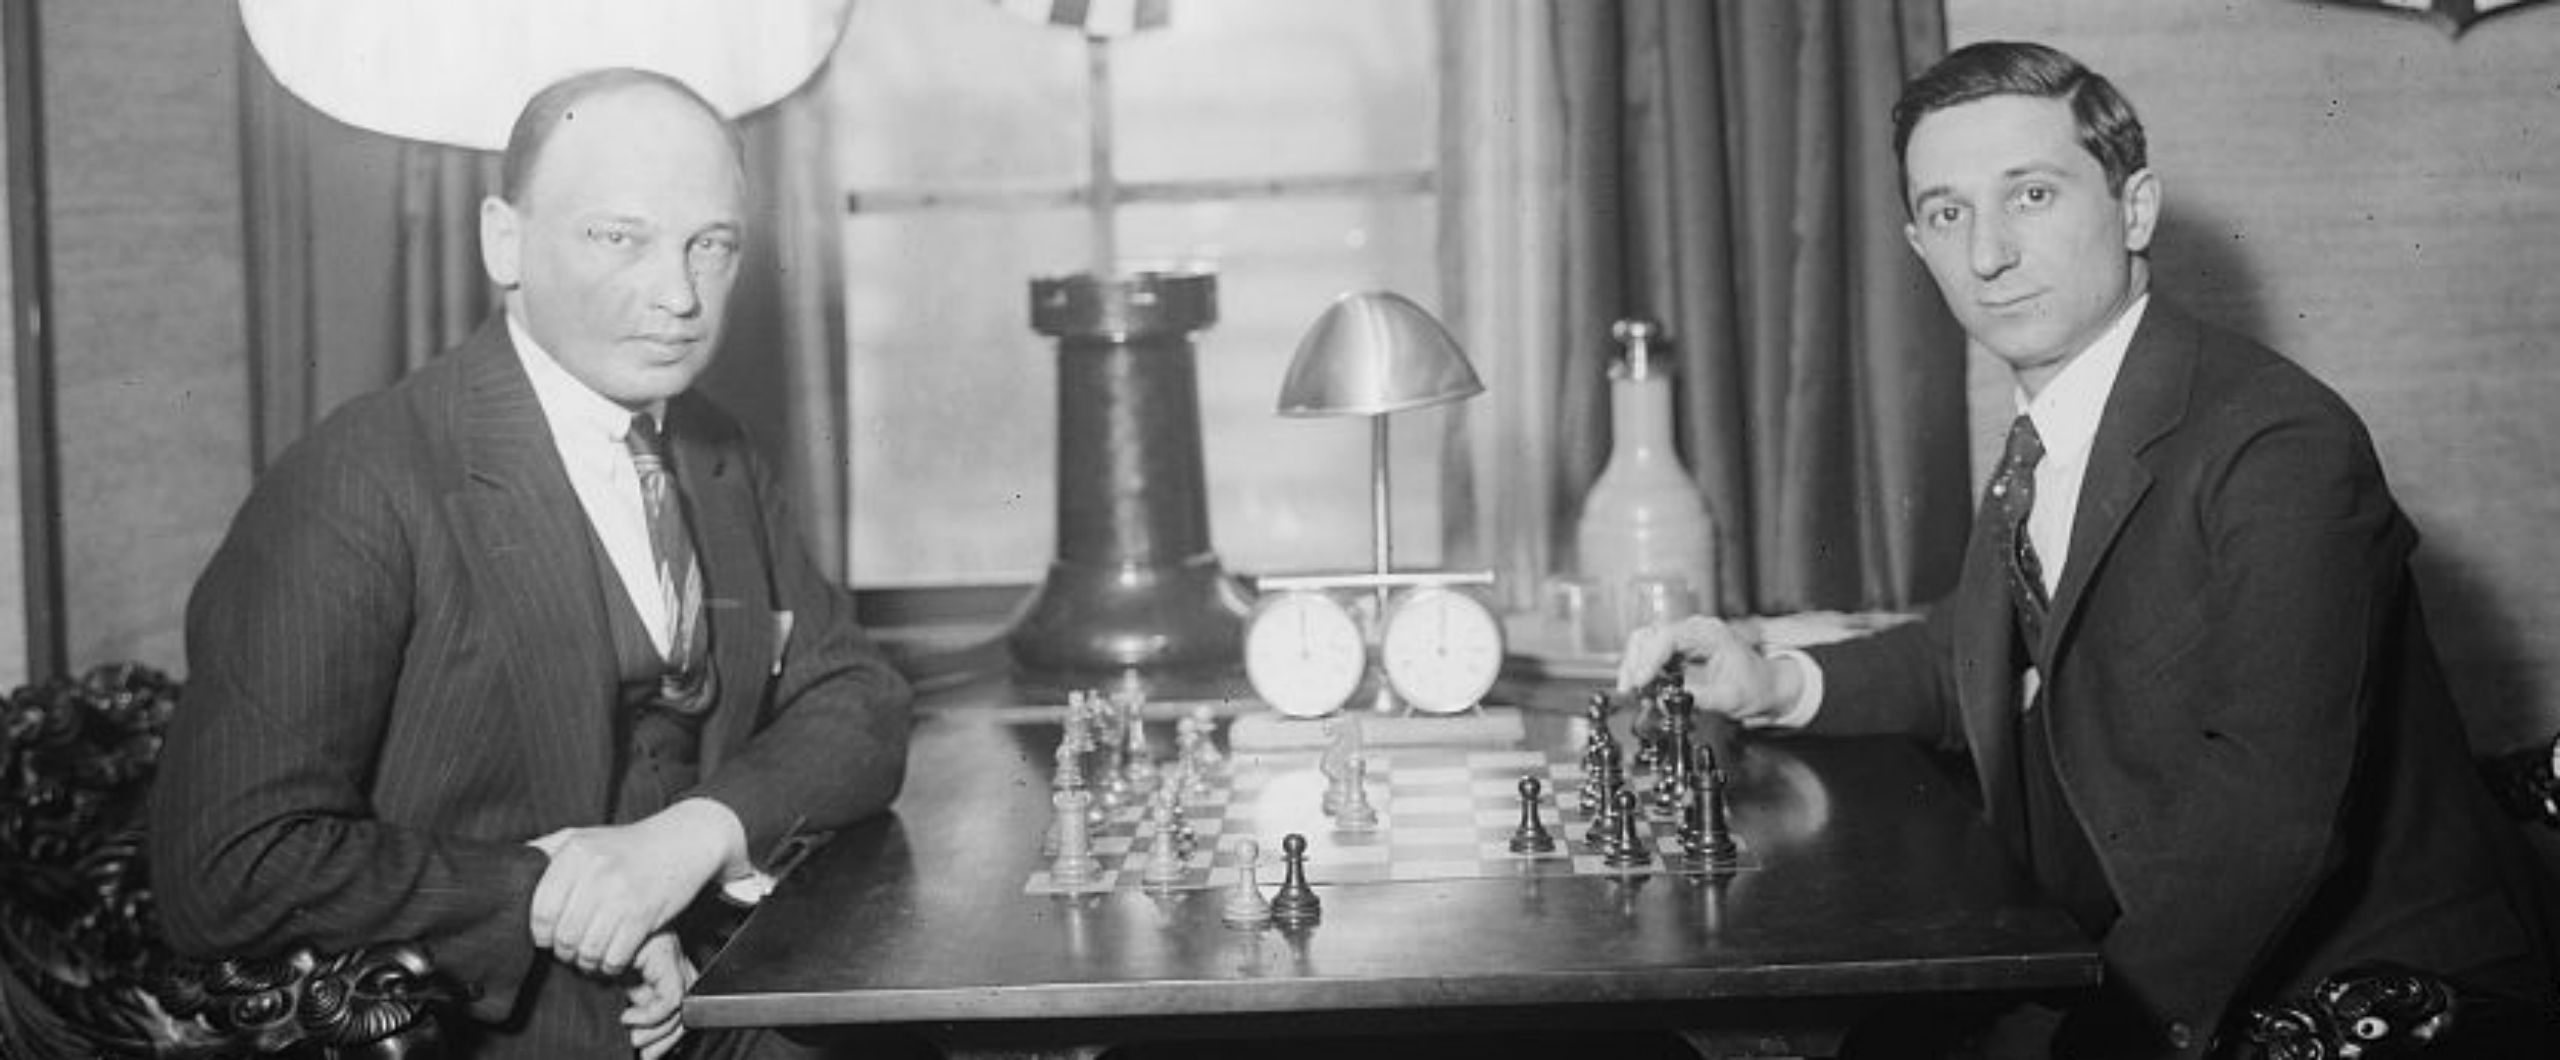 World Chess Hall of Fame to Induct Four New Jewish Members